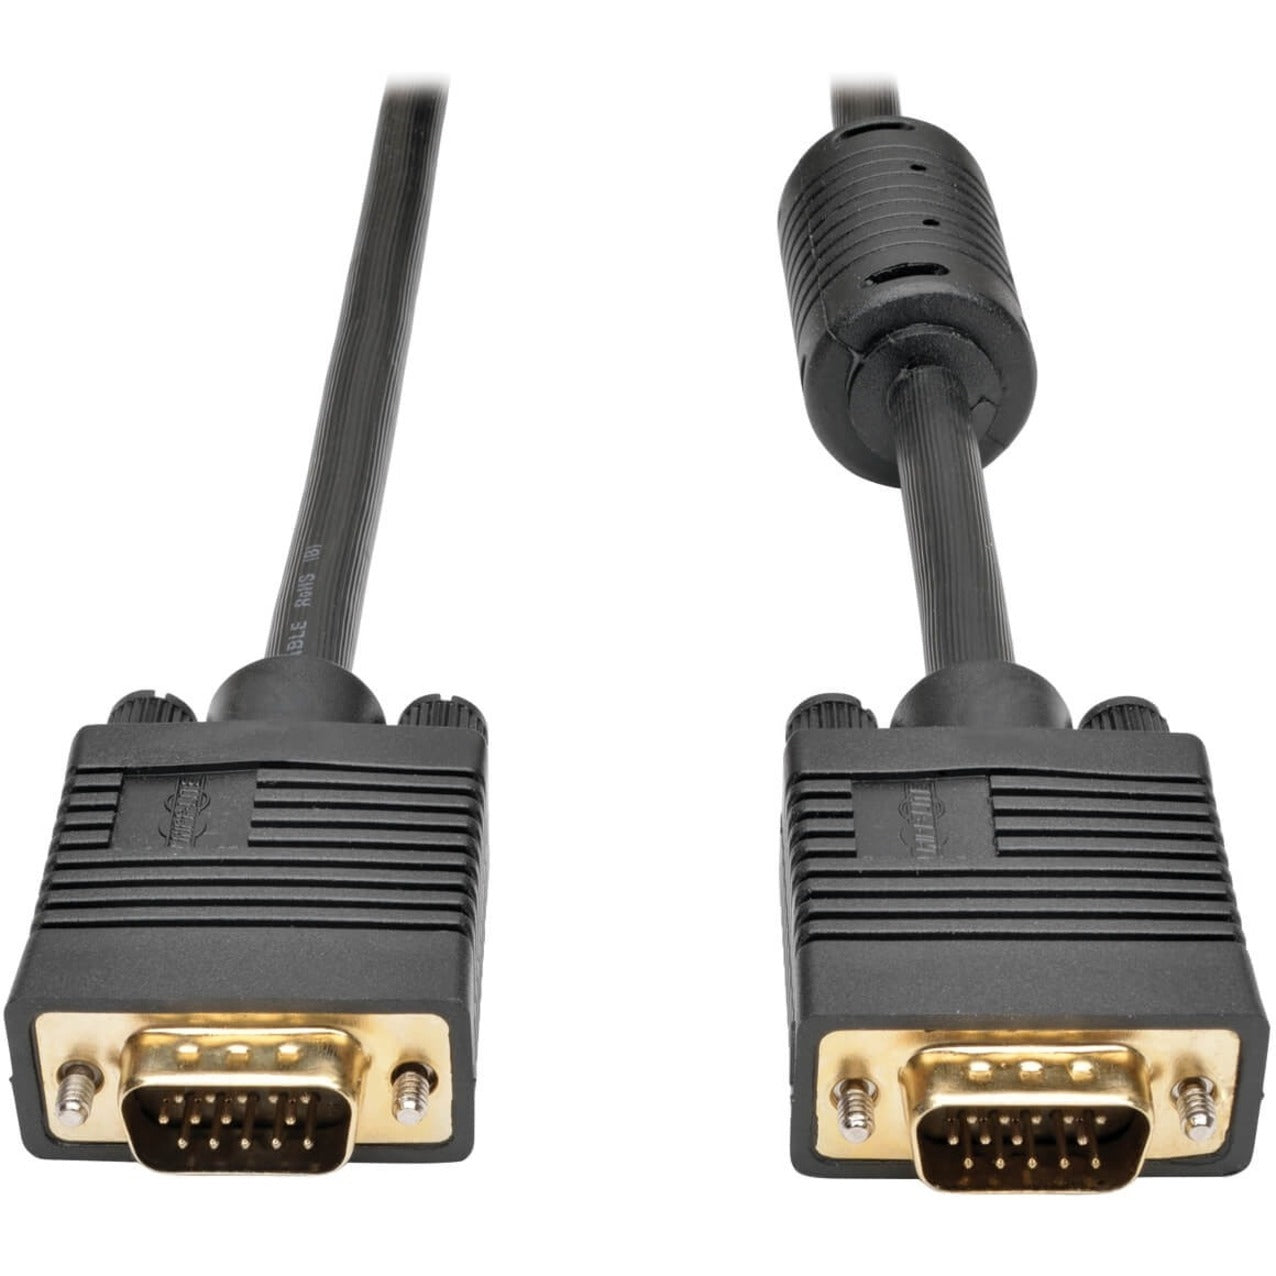 Tripp Lite P502-003 Video Cable, 3 ft, Gold Plated Connectors, Shielded